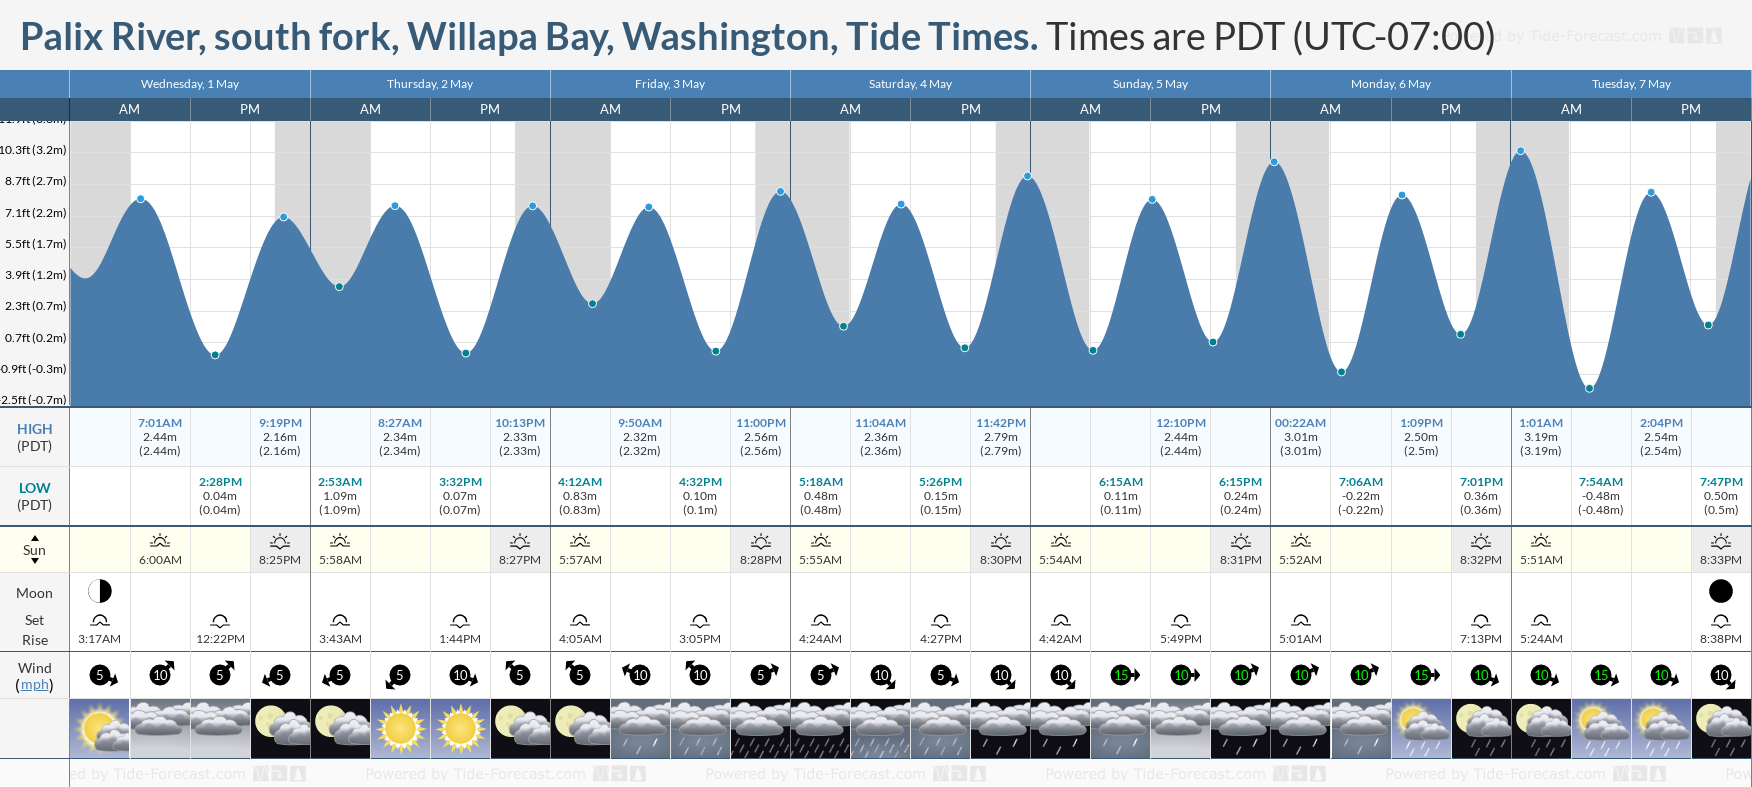 Palix River, south fork, Willapa Bay, Washington Tide Chart including high and low tide tide times for the next 7 days